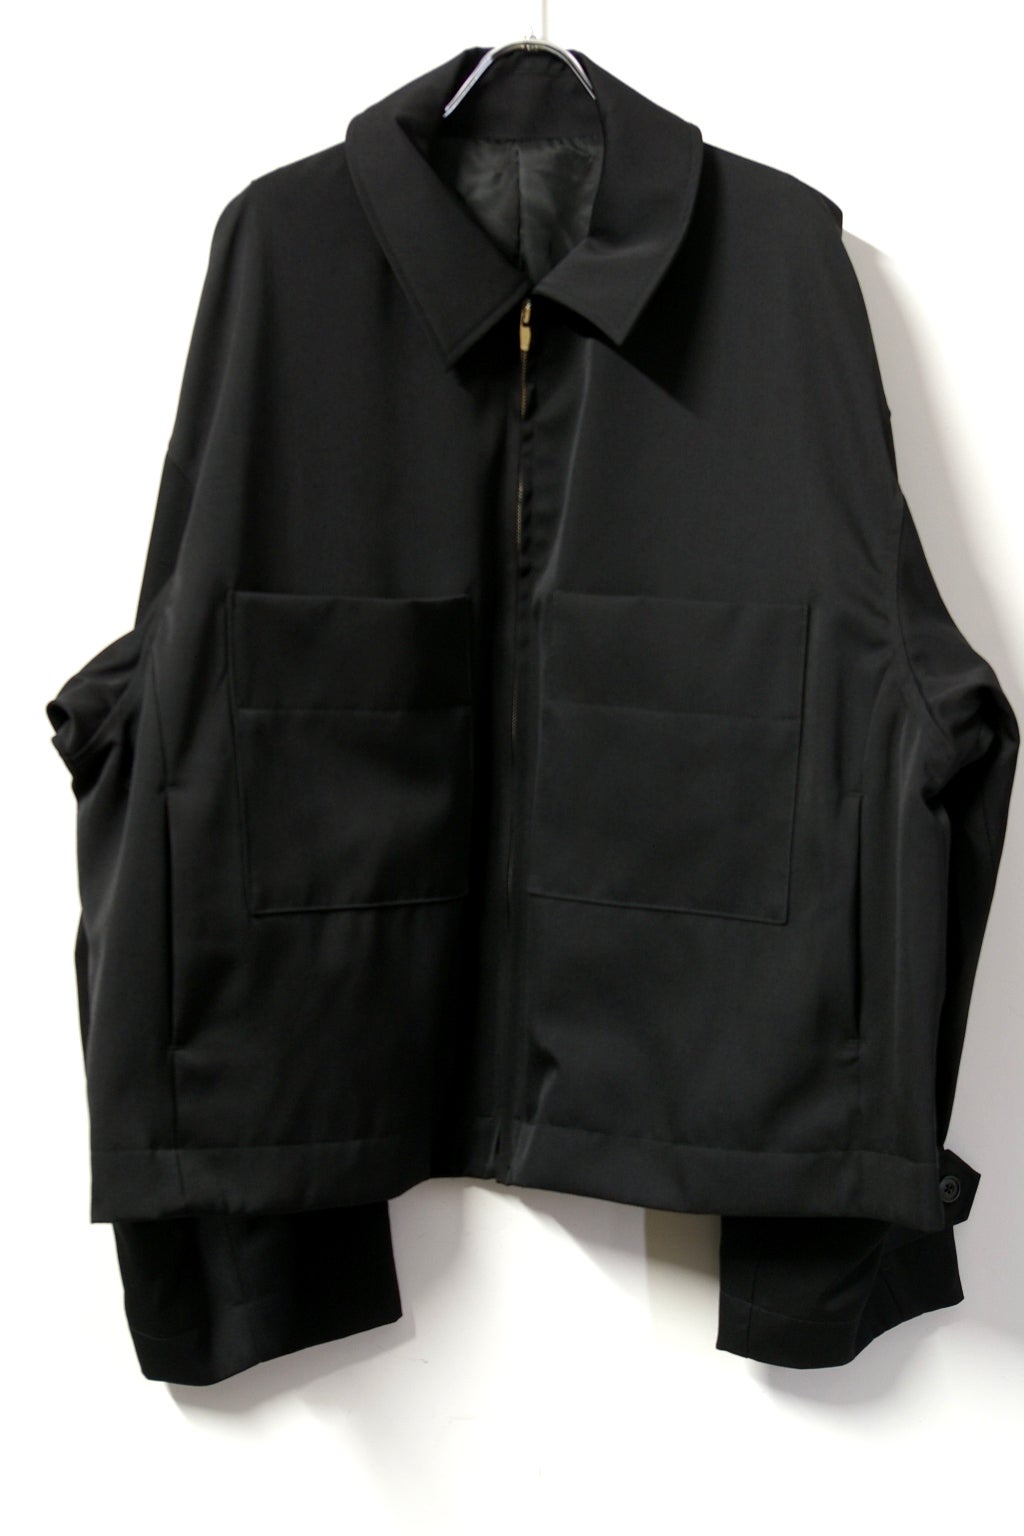 steinシュタイン/OVER SLEEVE DRIZZLER JACKET/Black 通販 取り扱い